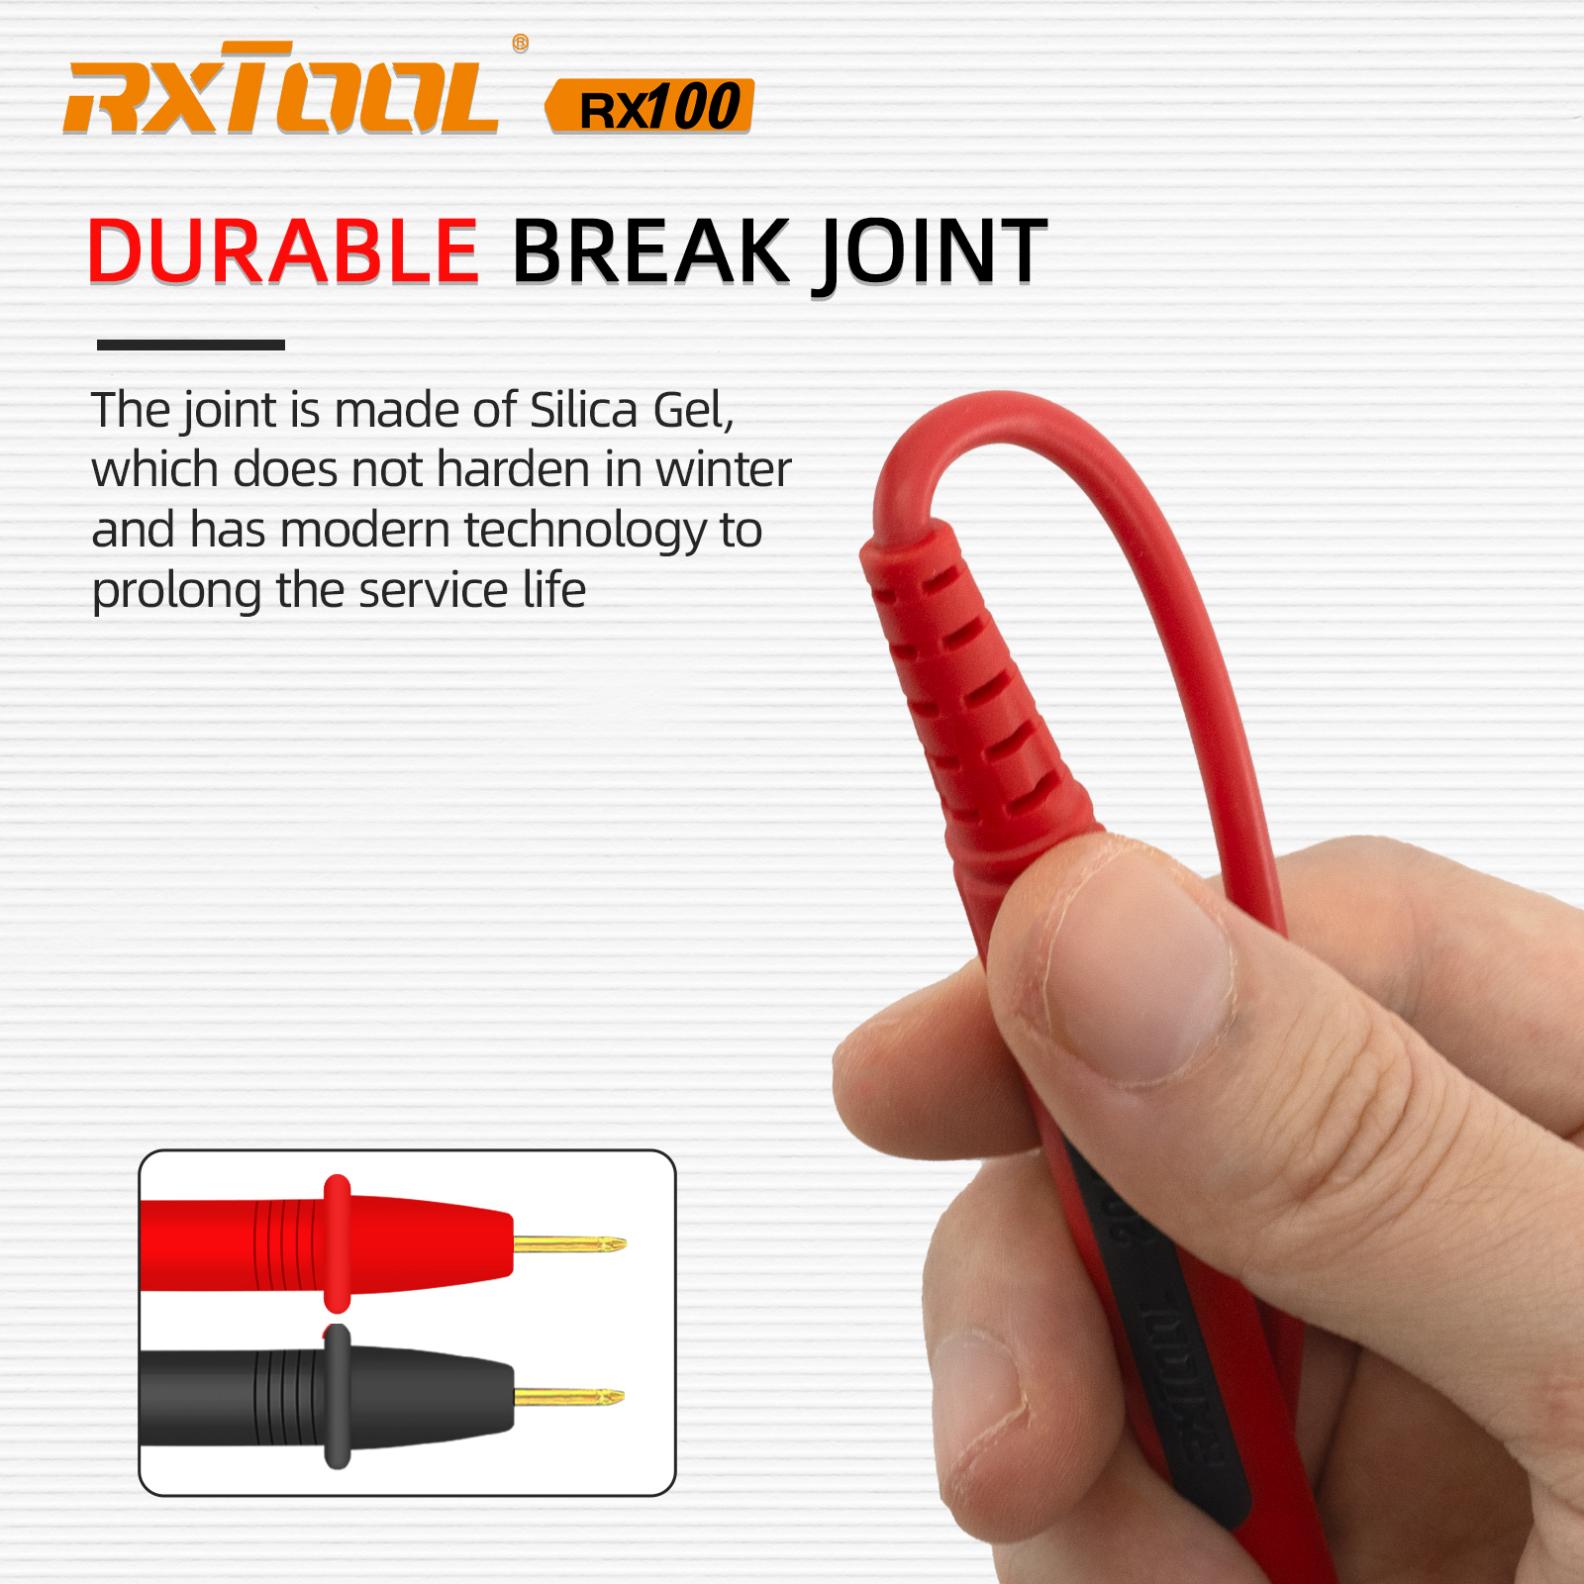 RXTOOL RX100 durable break joint